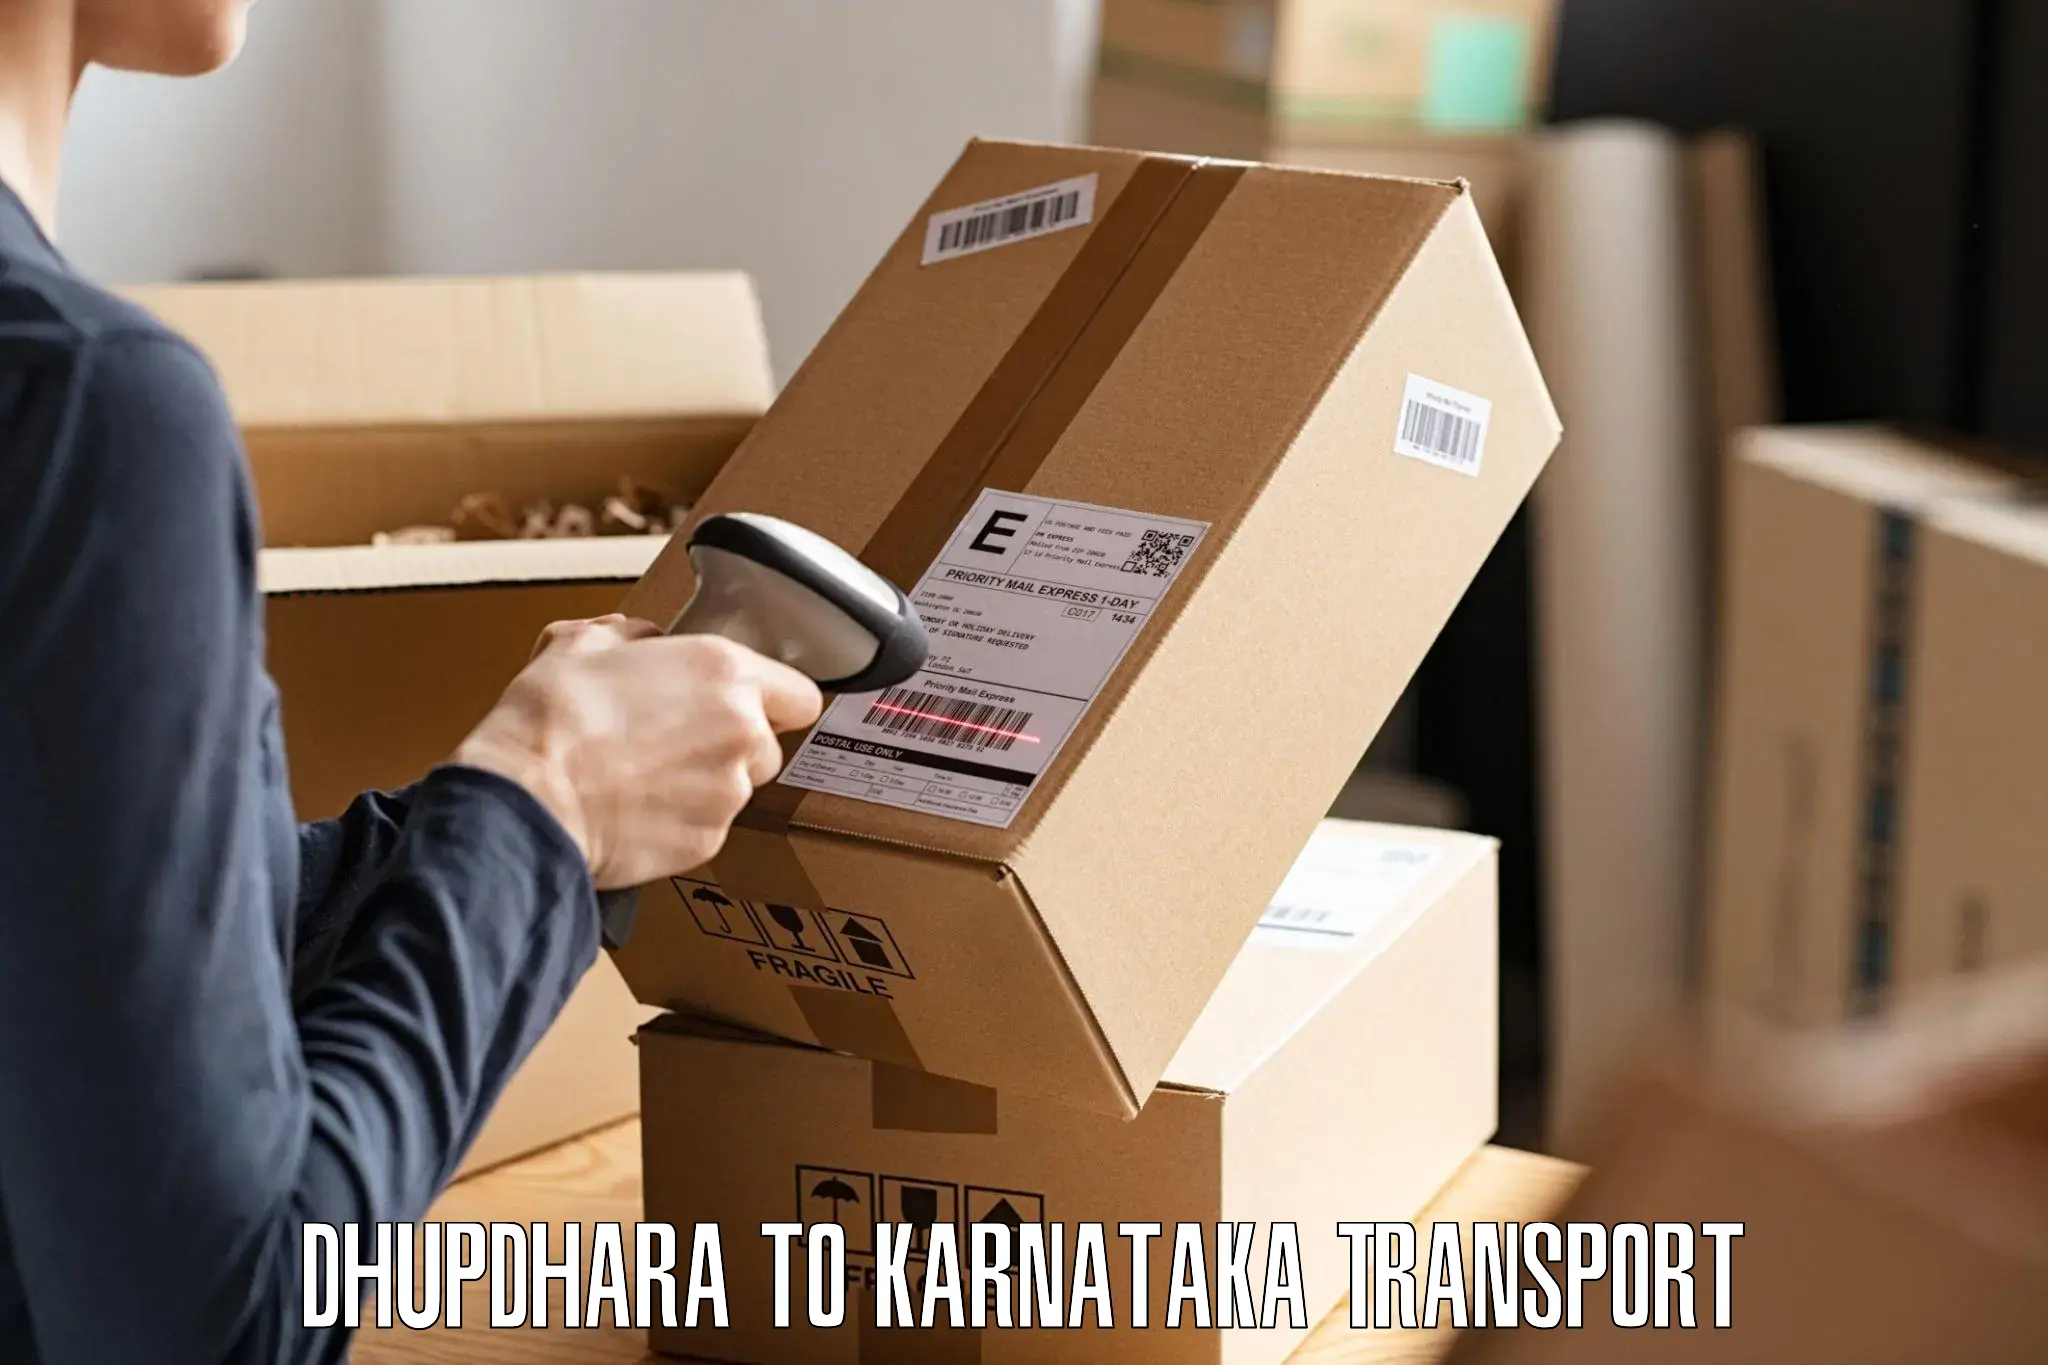 Daily parcel service transport Dhupdhara to Harugeri